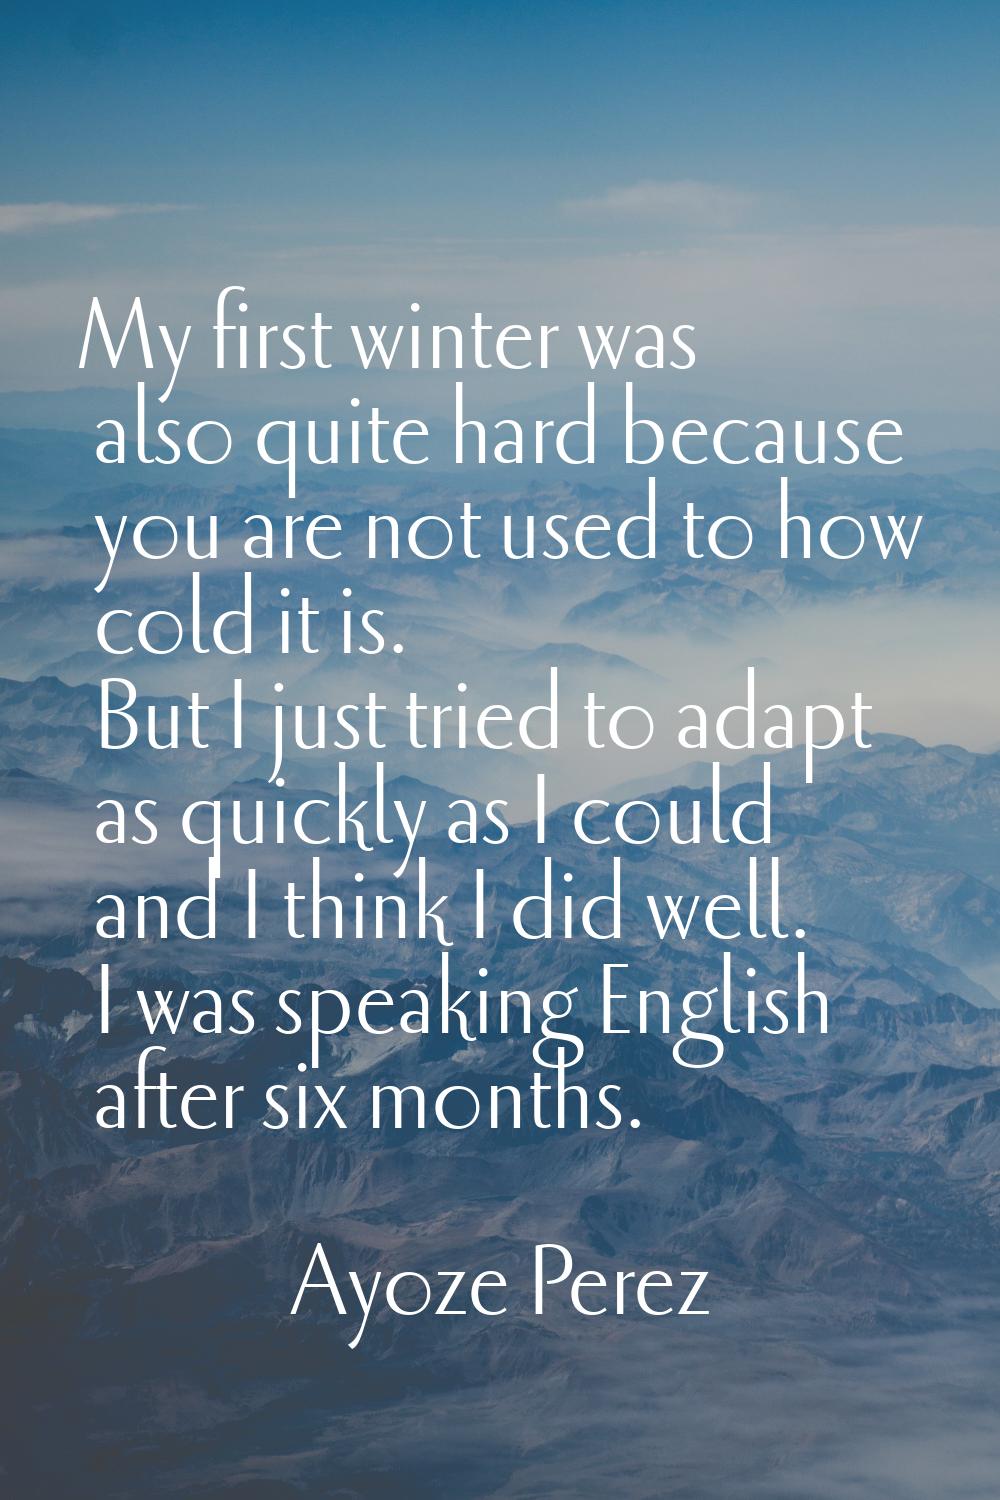 My first winter was also quite hard because you are not used to how cold it is. But I just tried to